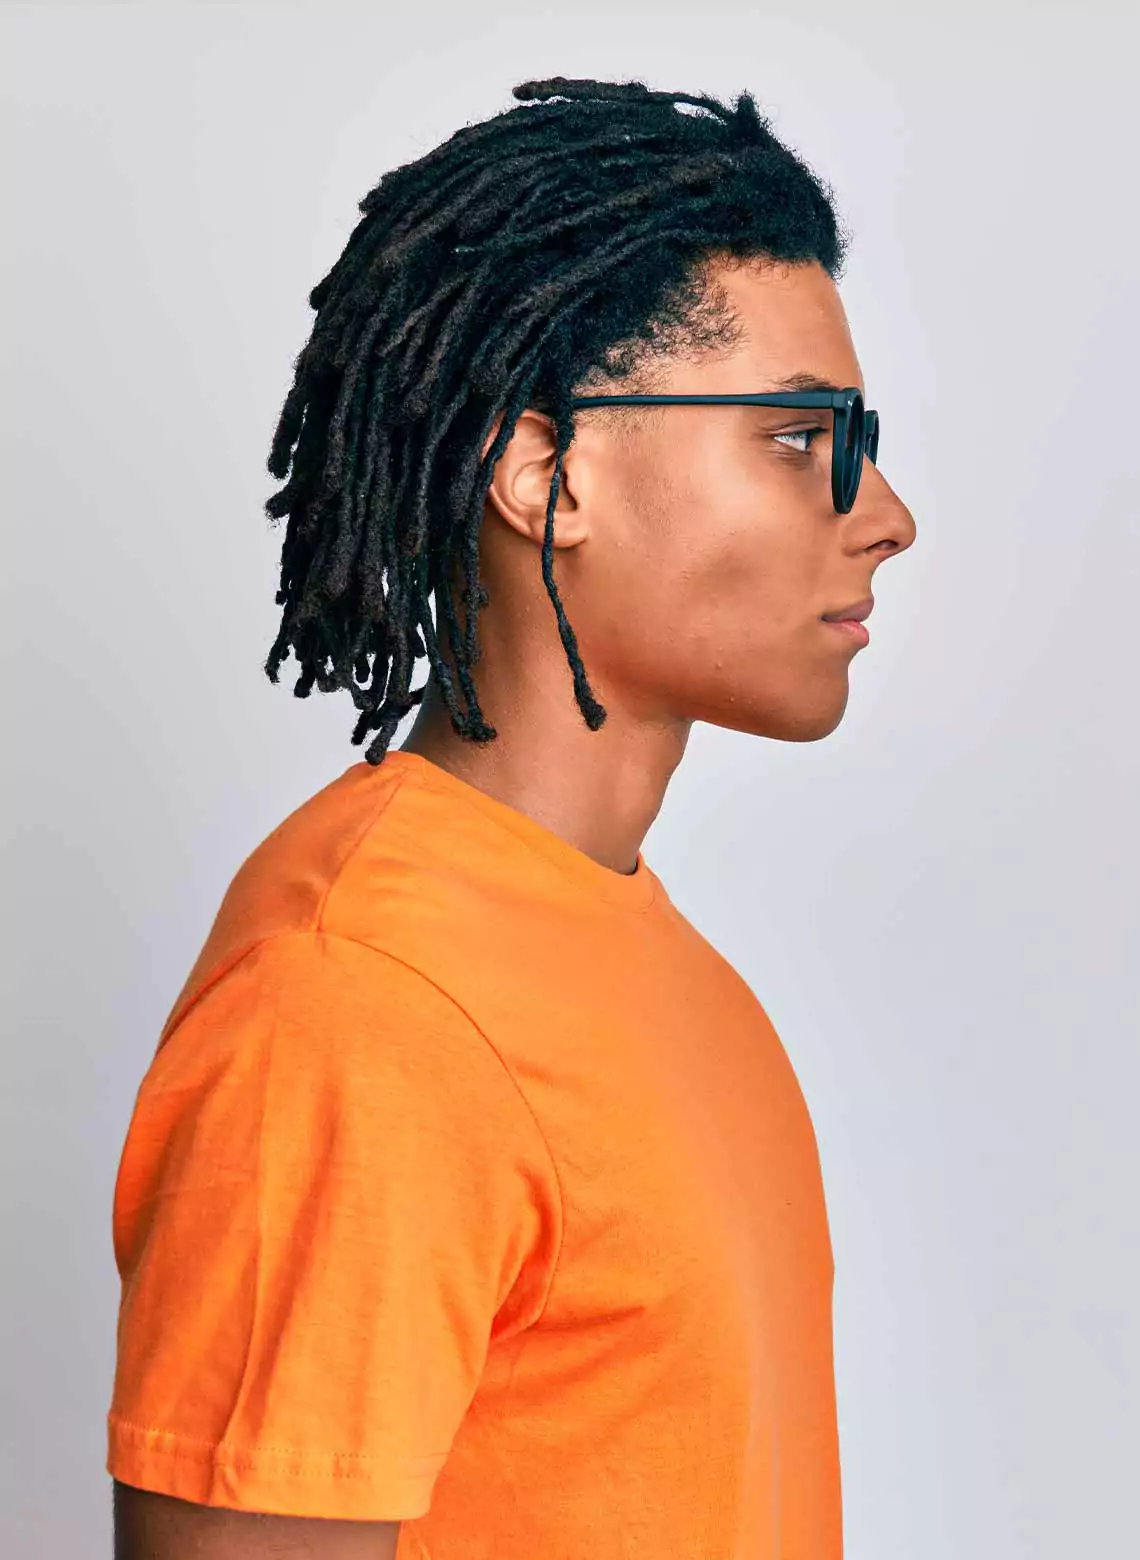 Image of man with combed back locs. 